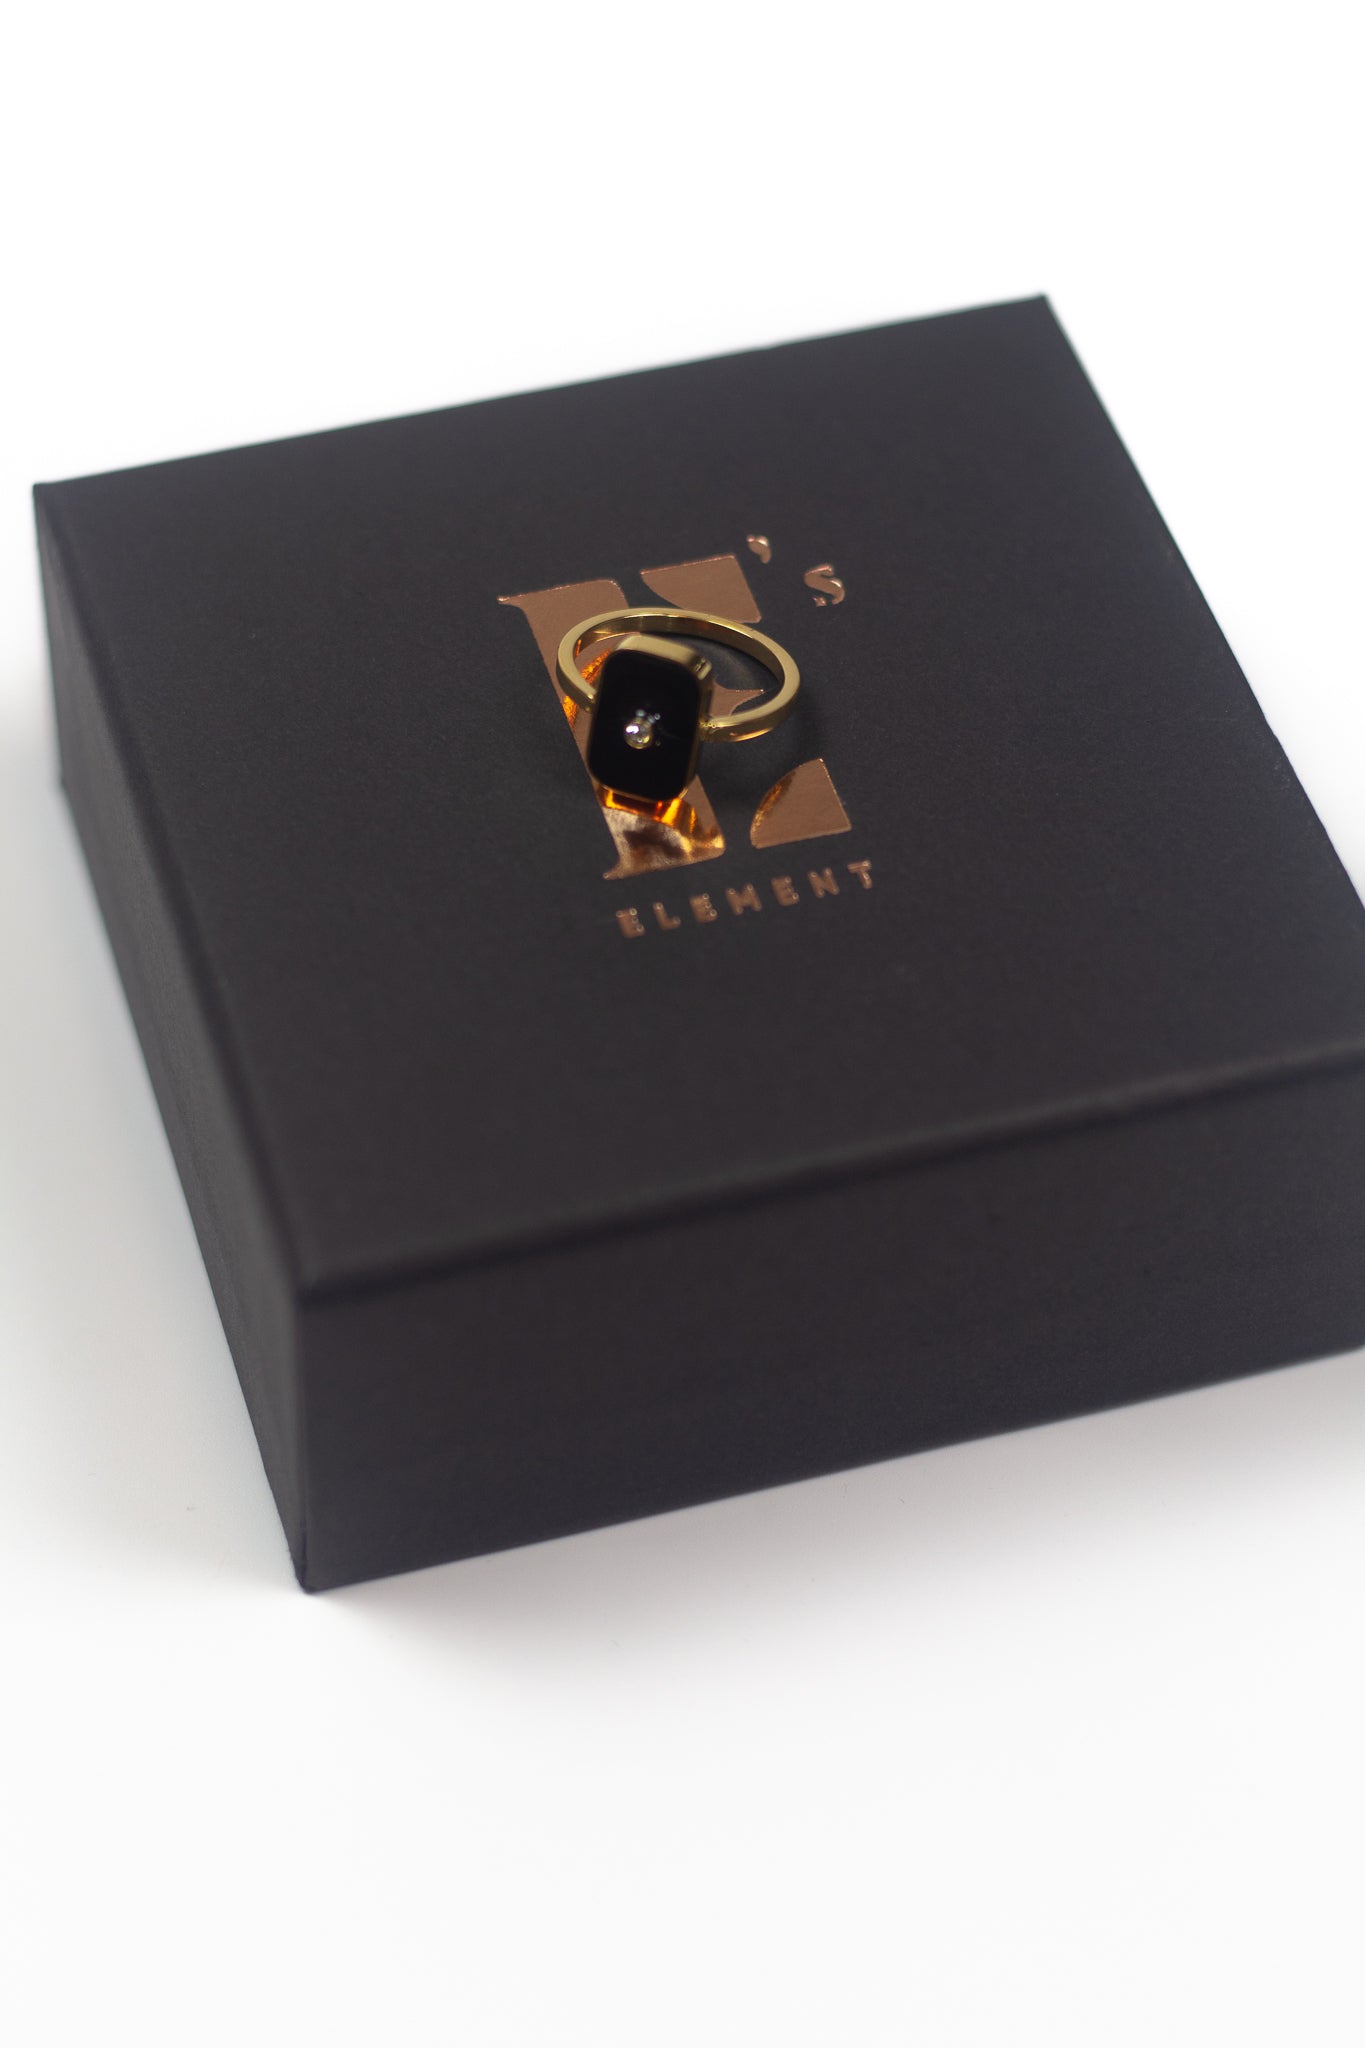 18k gold ring resing on a black container with the E's Element logo in gold. The ring has a zircon stone in the middle of a flat rectangular surface in black. Infinity Zircon Ring by E's Element.